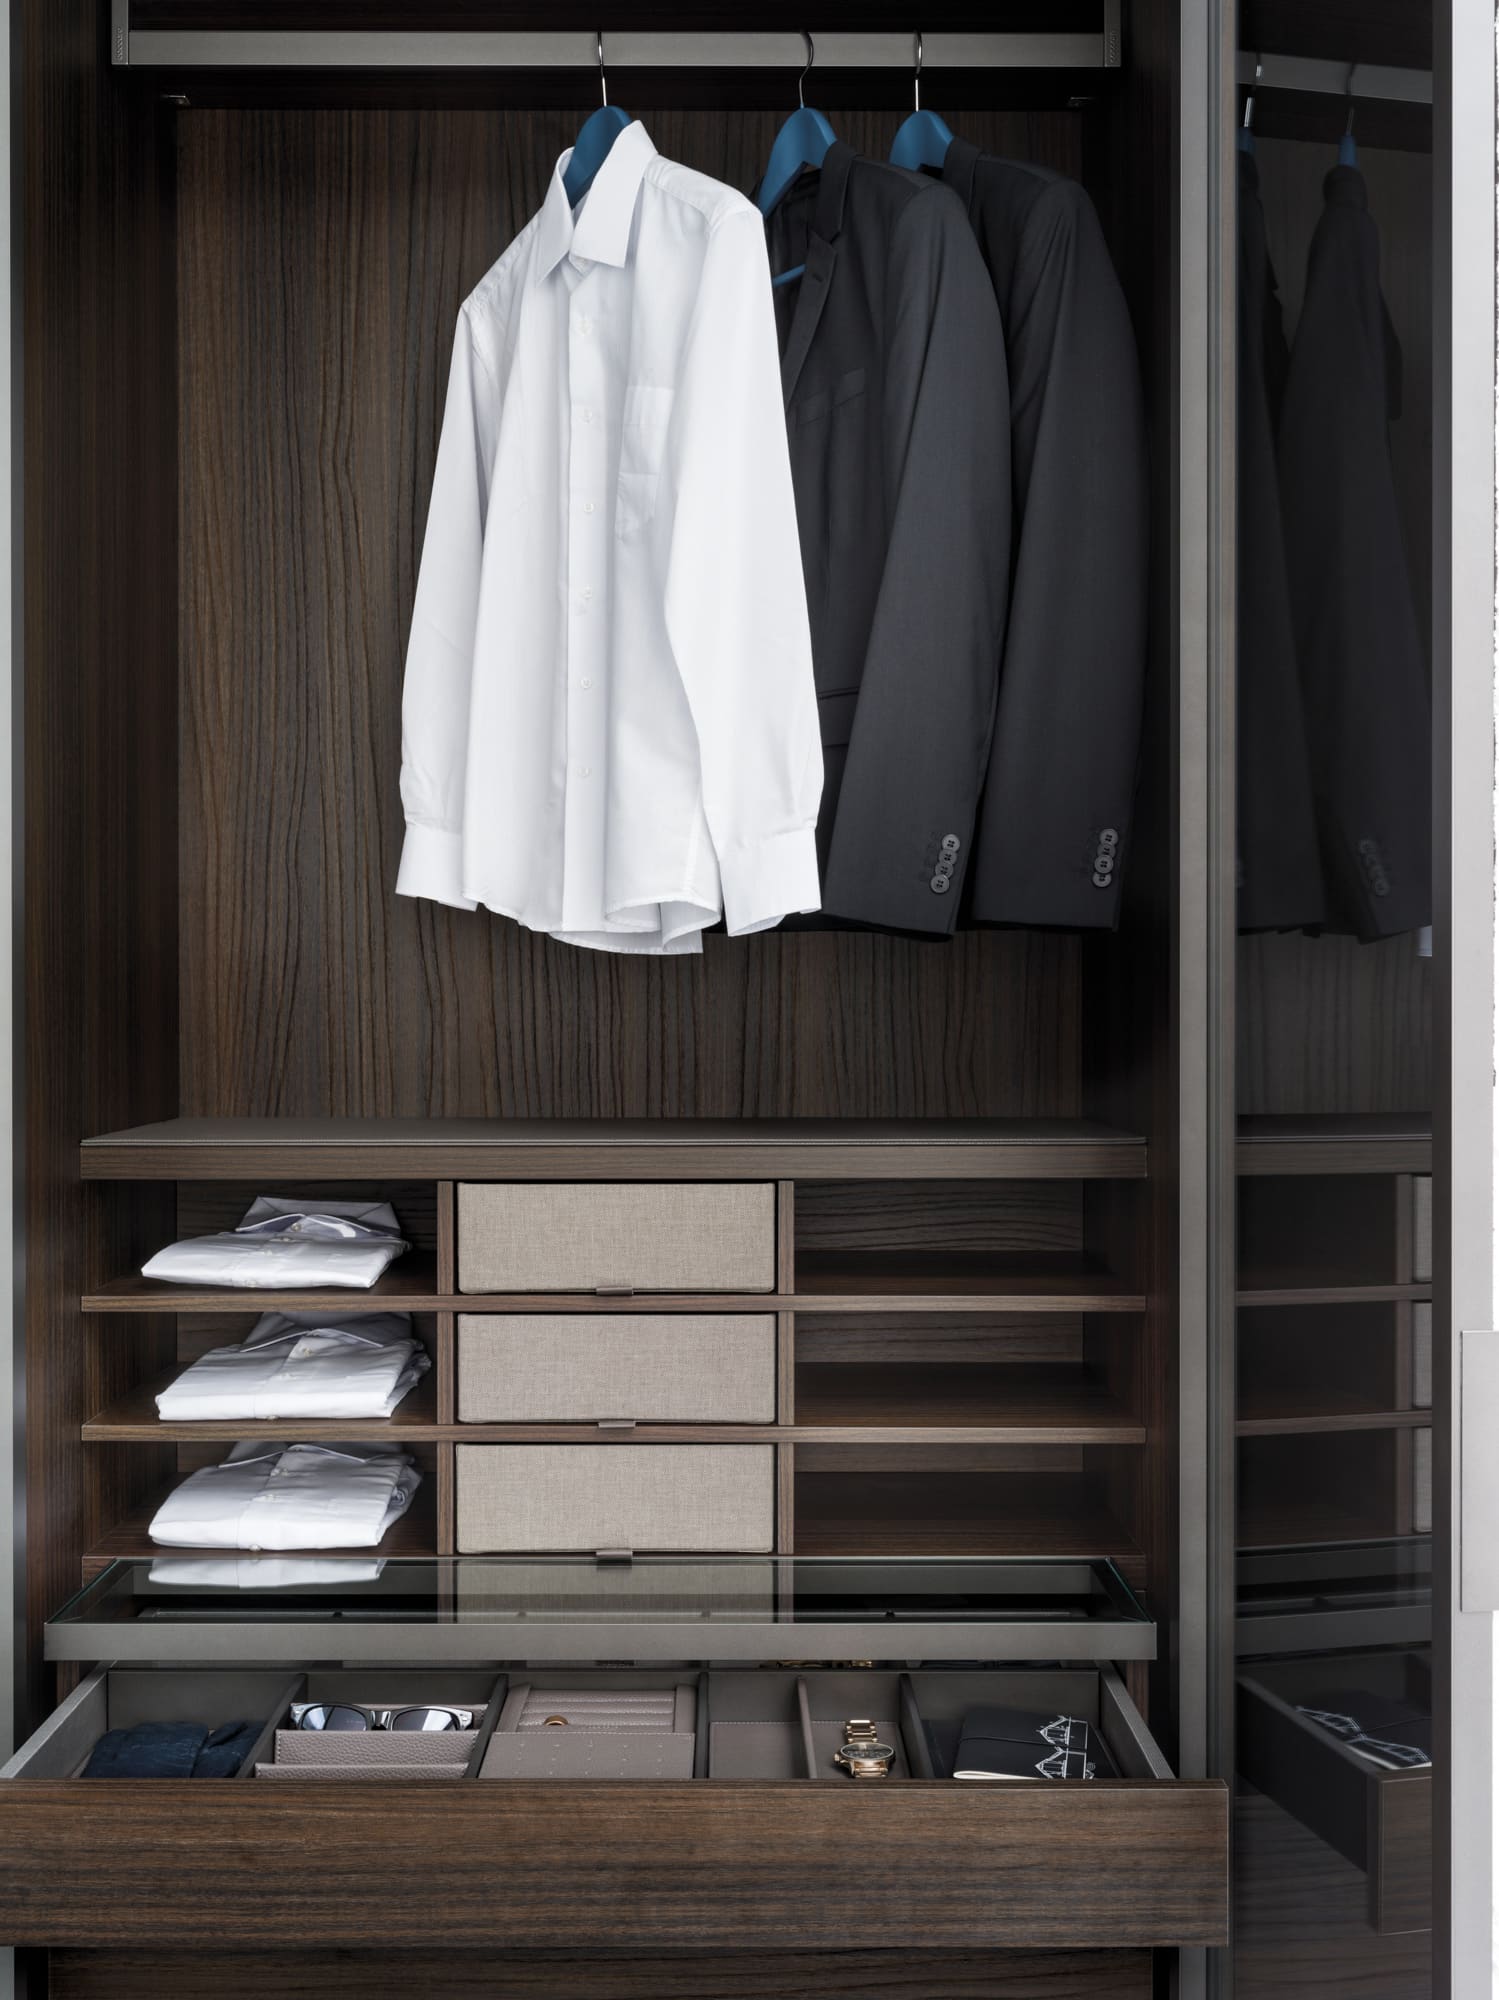 Closet interior in Easy Eucalyptus. The grid system can include 6, 8, 9 or 12 open shelves with or without extractable drawers covered in fabric, creating a play of open and closed storage spaces that is both functional and elegant.